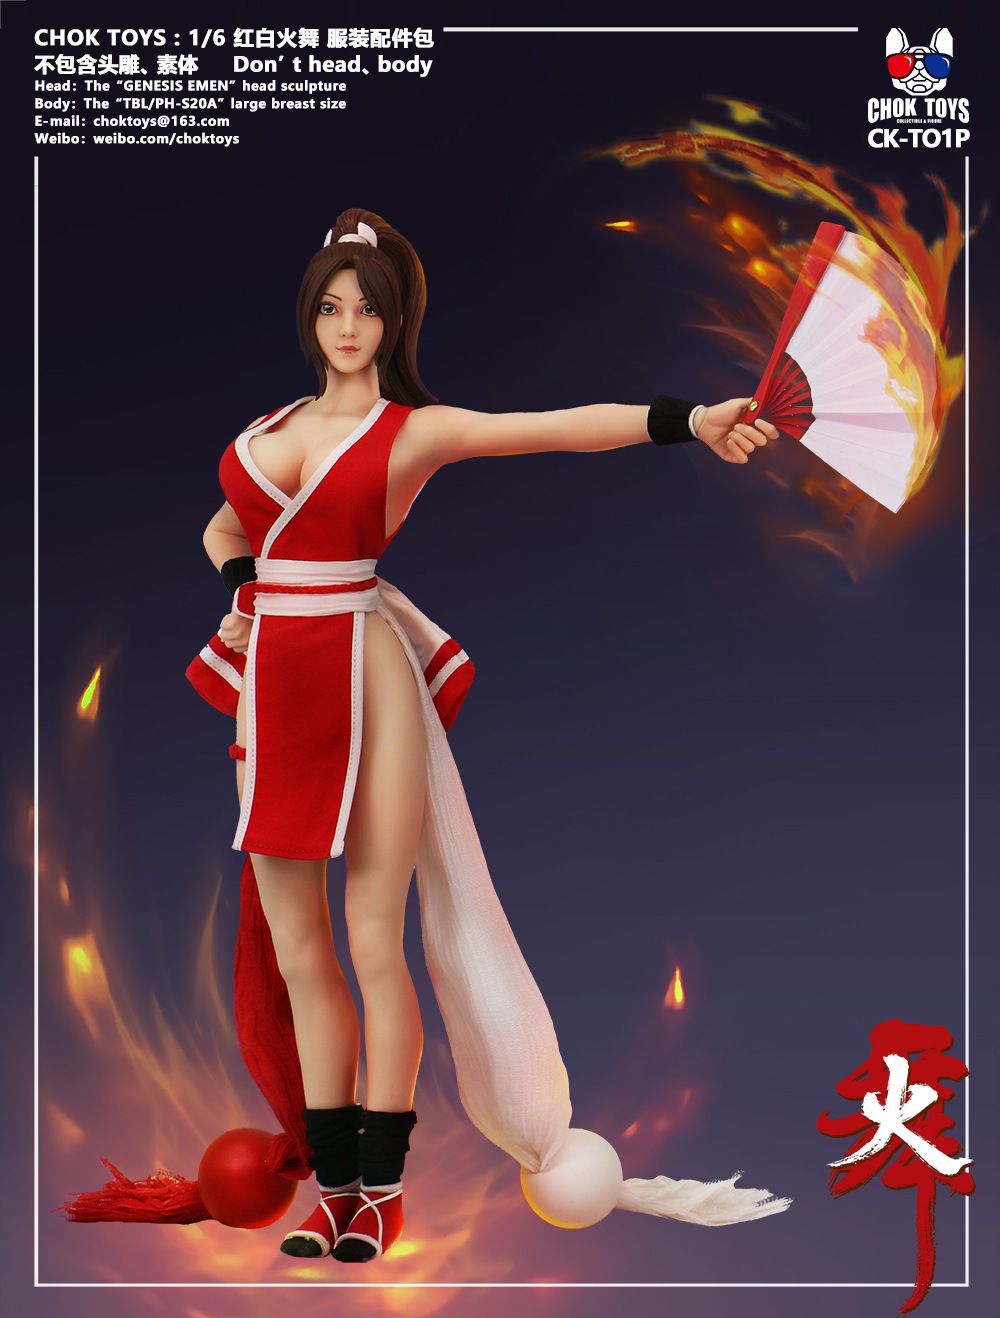 NEW PRODUCT: CHOK TOYS:1/6 Fire Dance (Red, White/Black Gold) Clothing Accessories Package 3cf20010